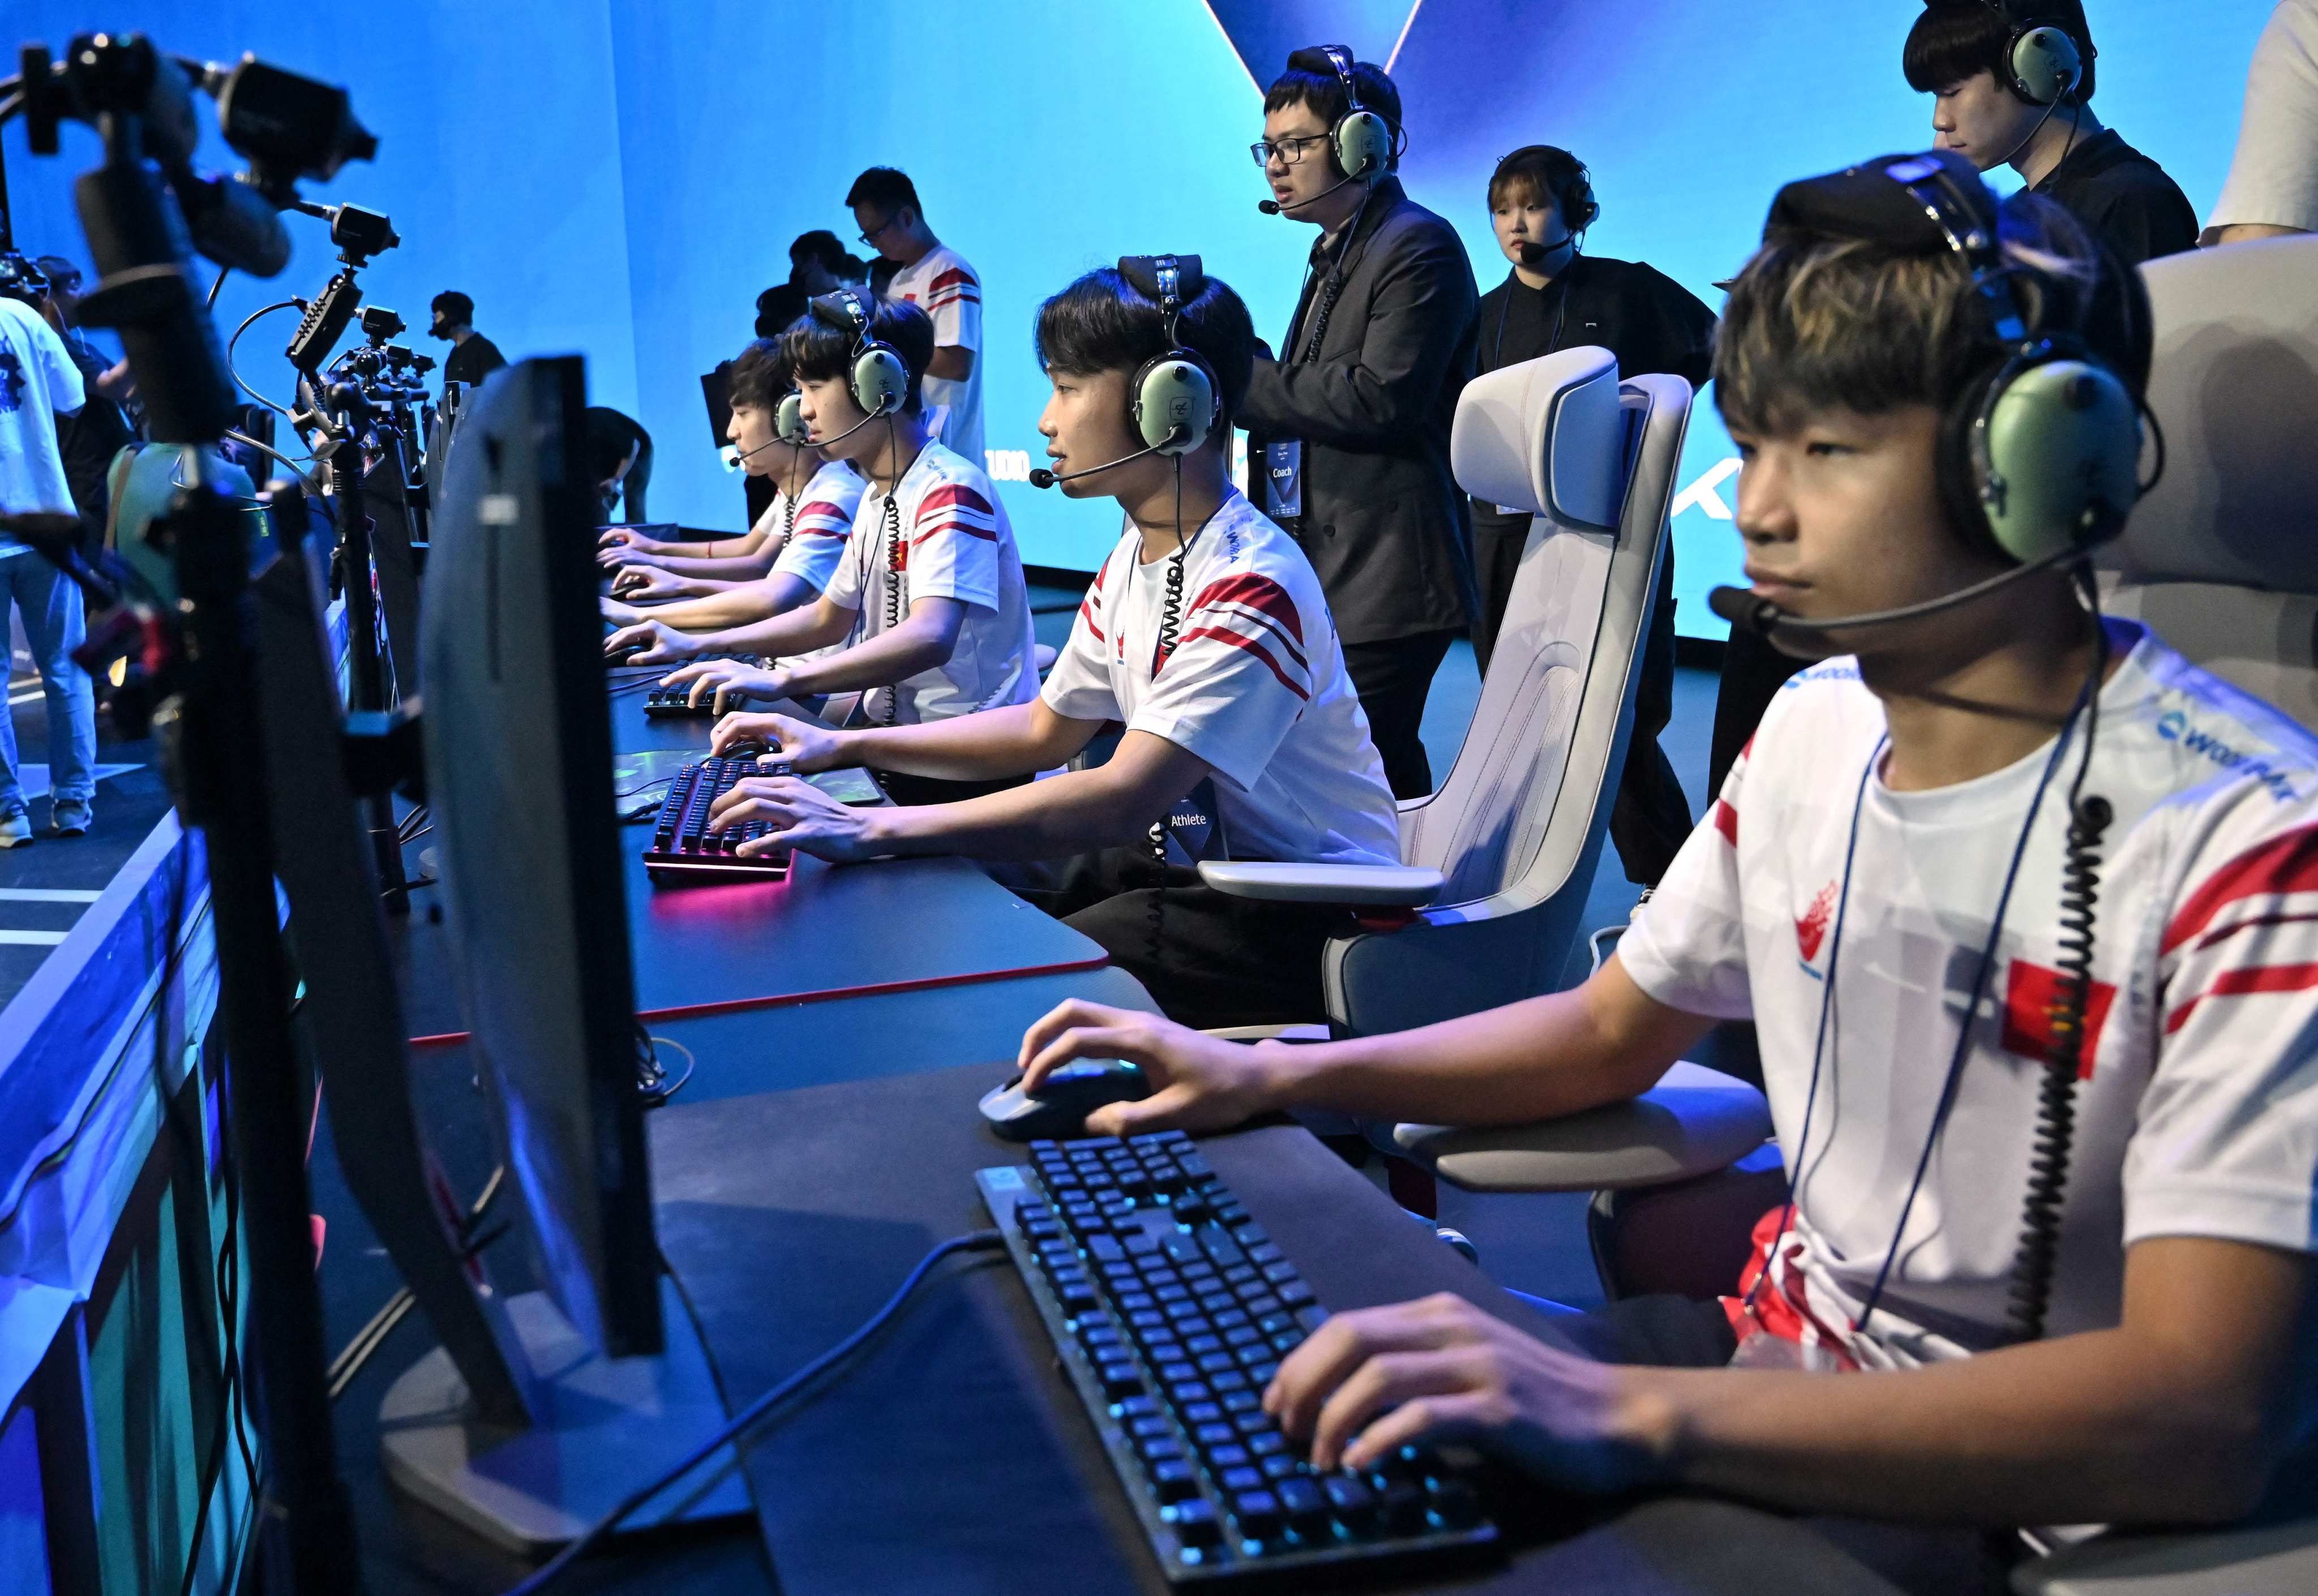 Esports is set to price its tickets high, being the only discipline with a lottery system for tickets. Photo: AFP